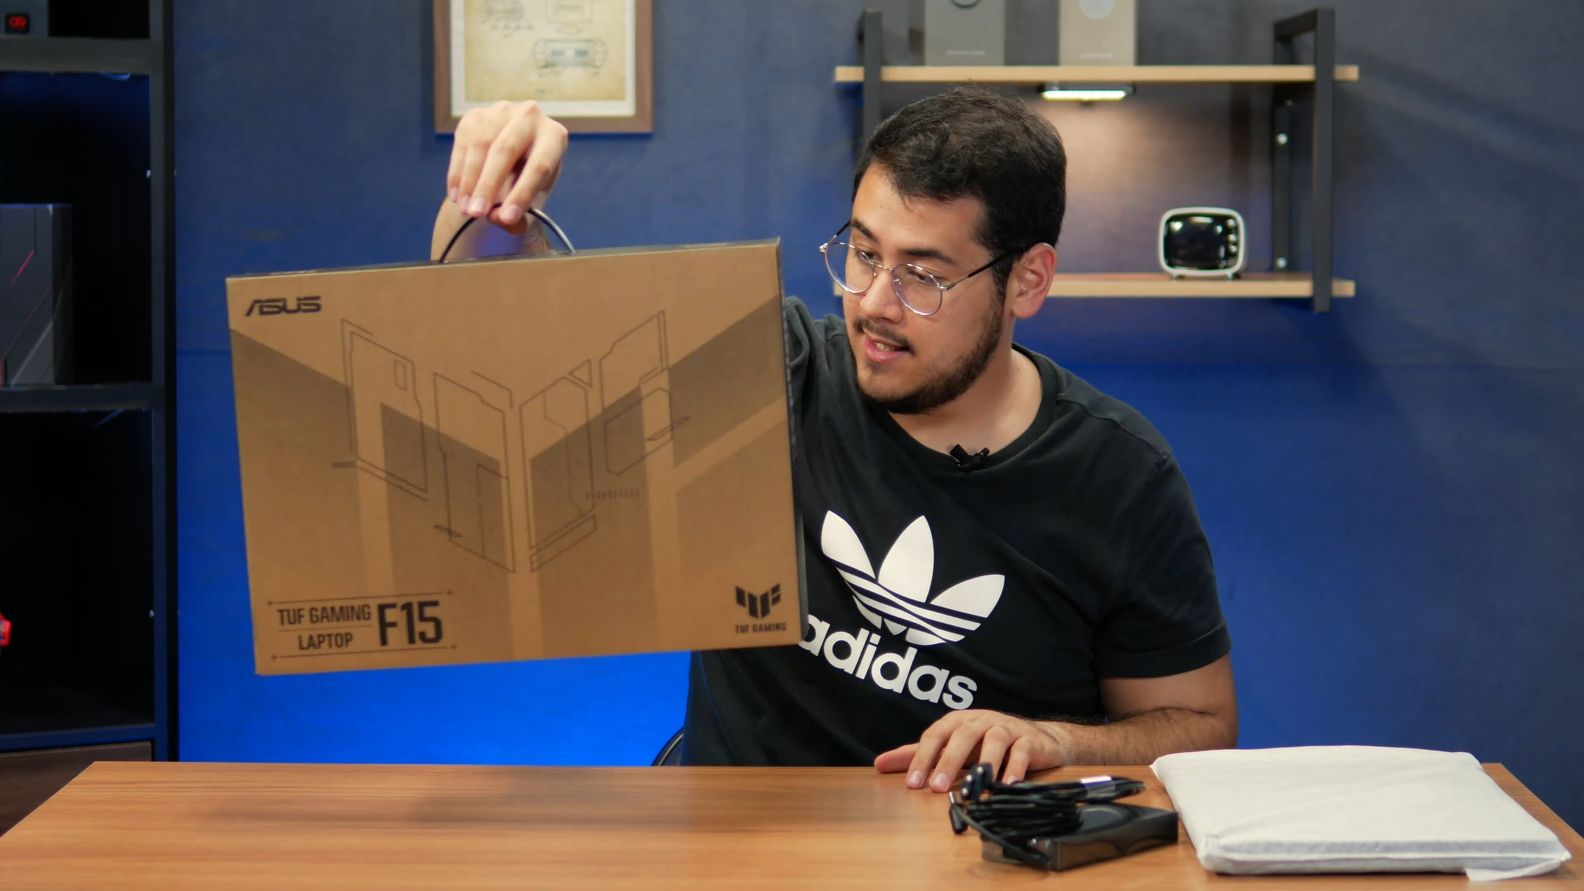 Unboxing e Hands-on TUF F15